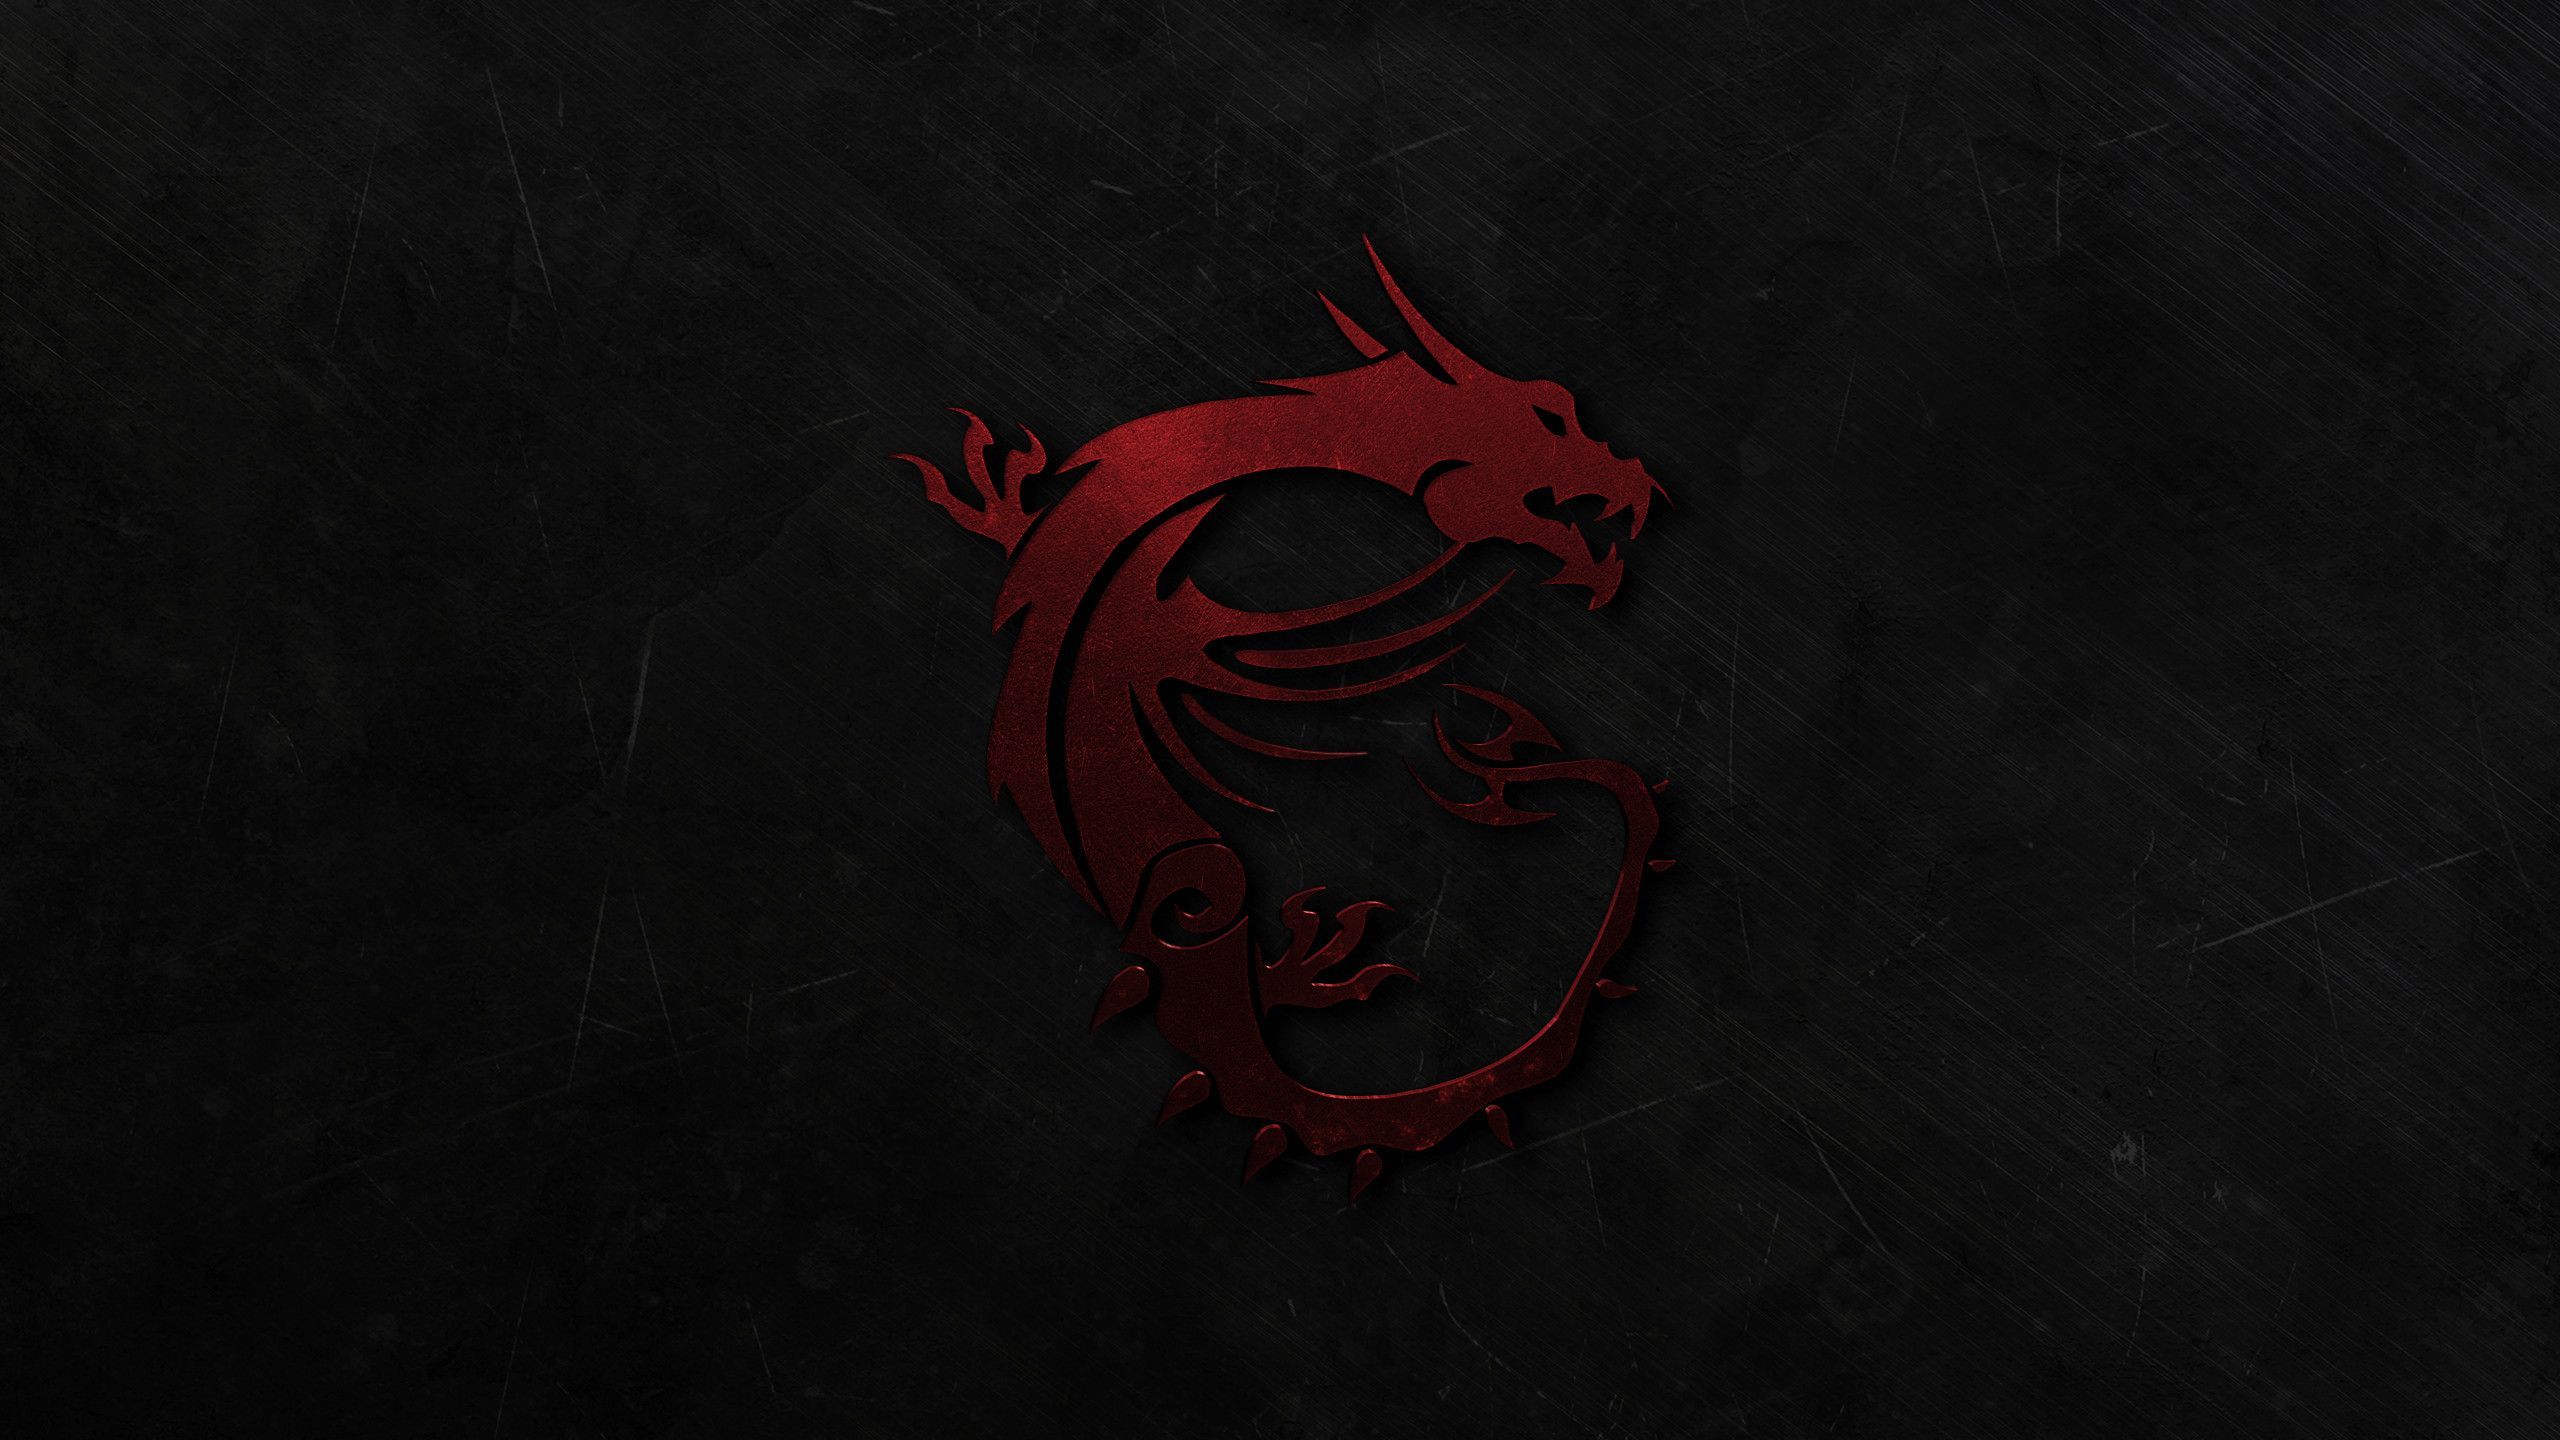 Res: 2560x MSI Gaming Dragon Wallpaper V2 (Red) by Xilent21. Gaming wallpaper, Technology design graphic, Graphic technology